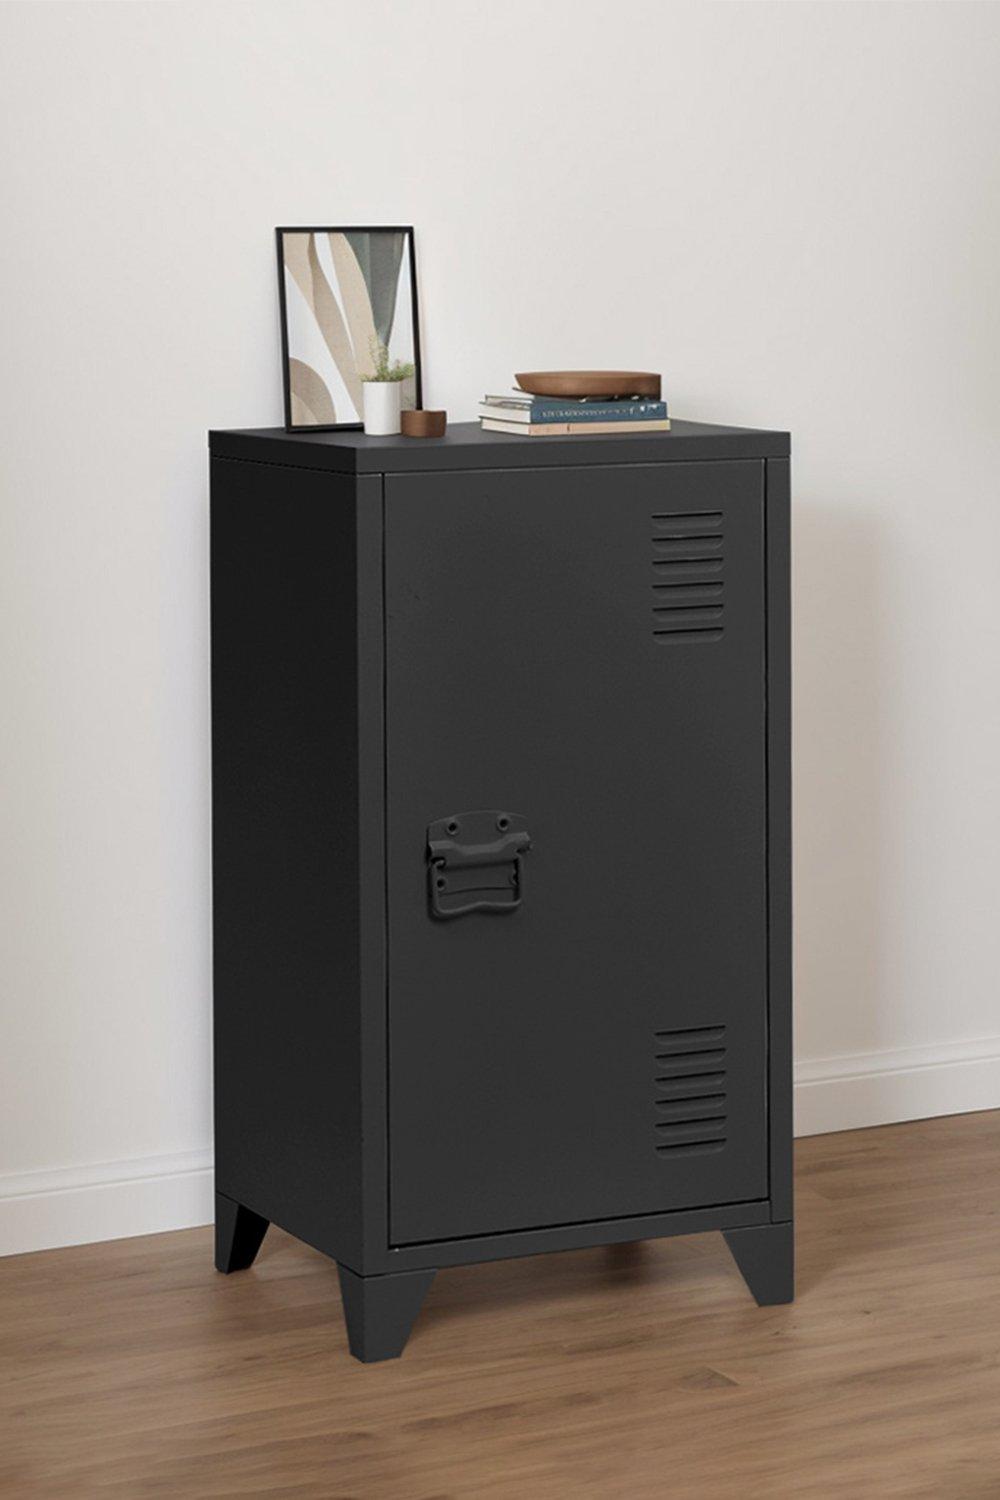 1 Door Tall Storage Filing Cabinet for Office